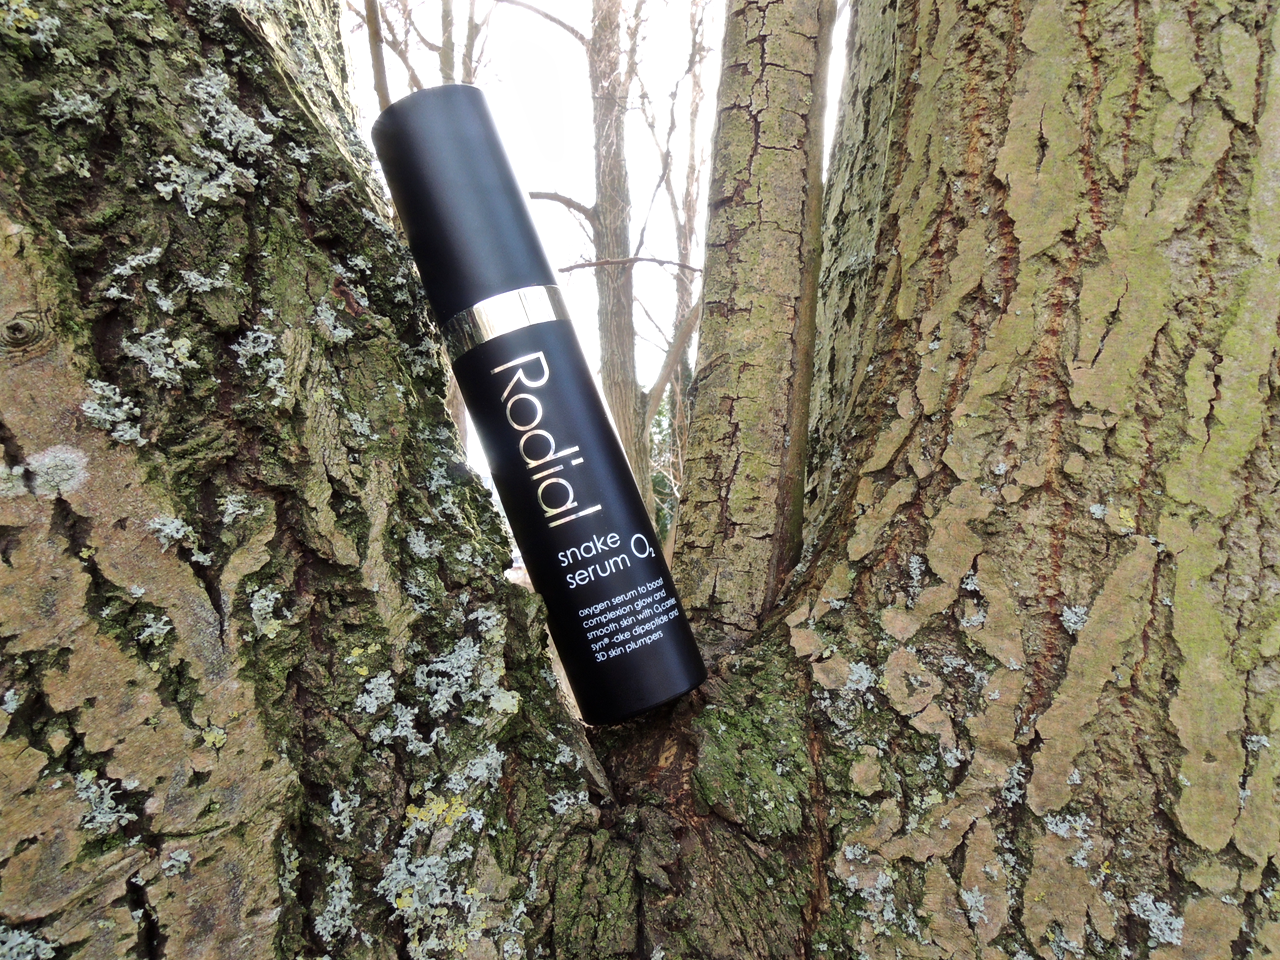 Rodial Snake O2 Carrier Serum Review.